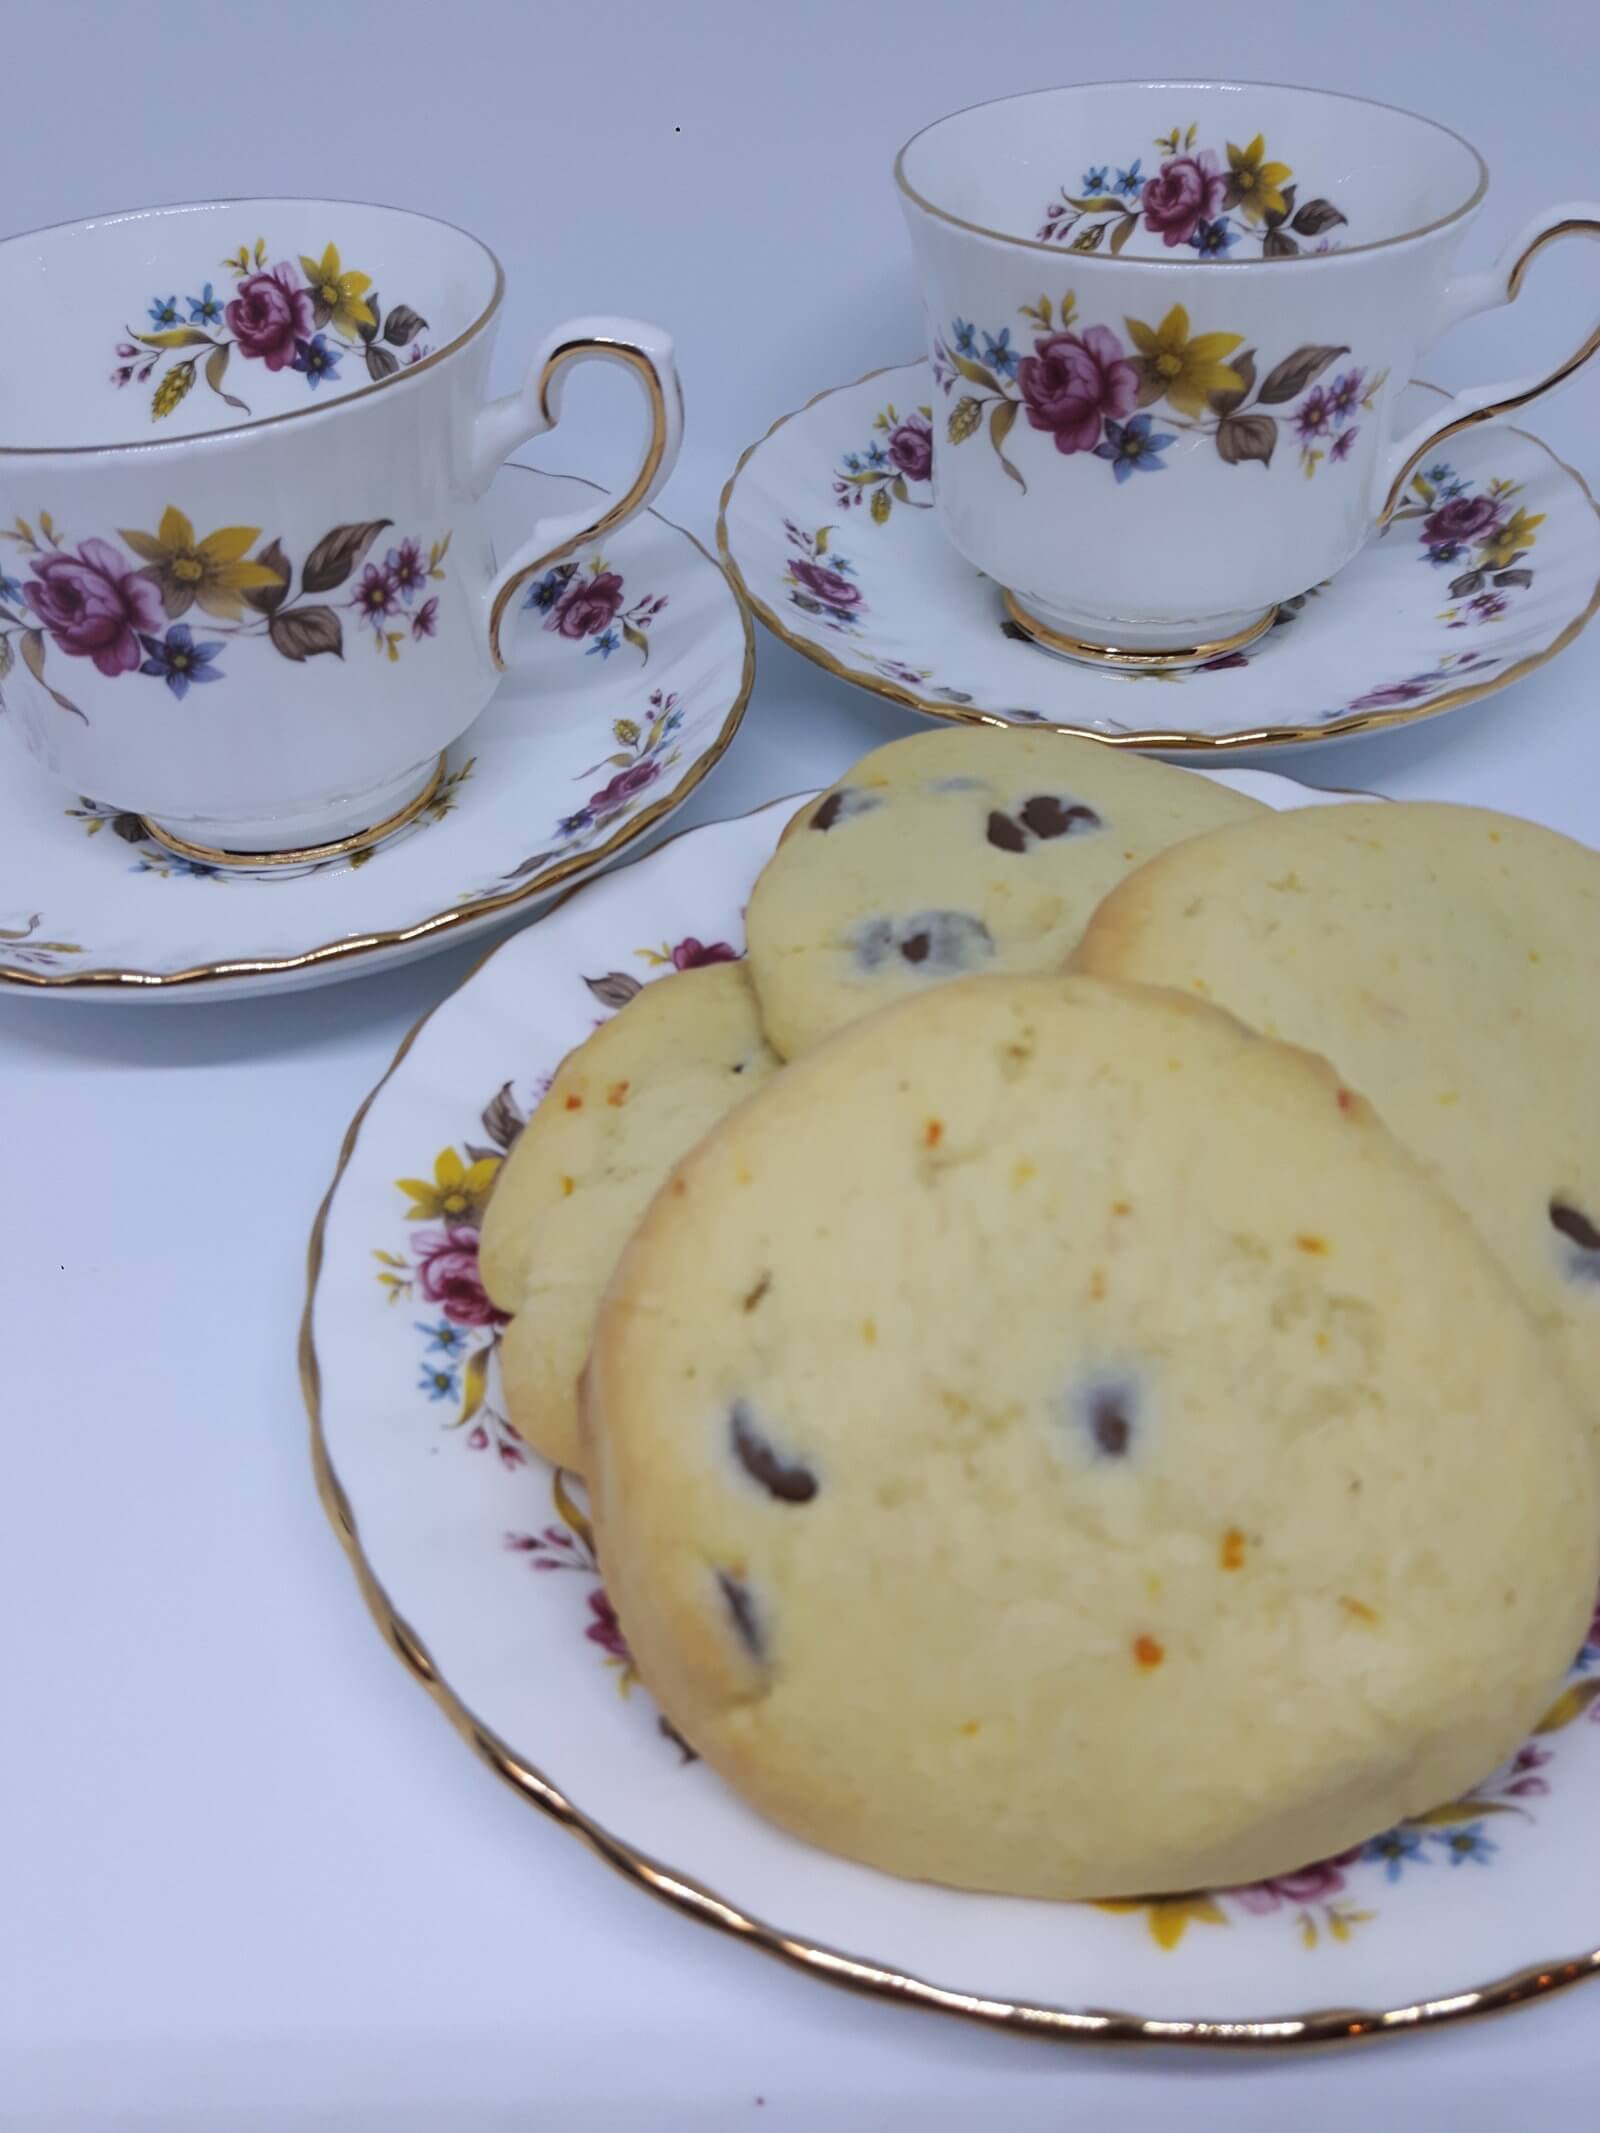 A plate with Chocolate Orange Shortbread and 2 Vintage Tea Cups